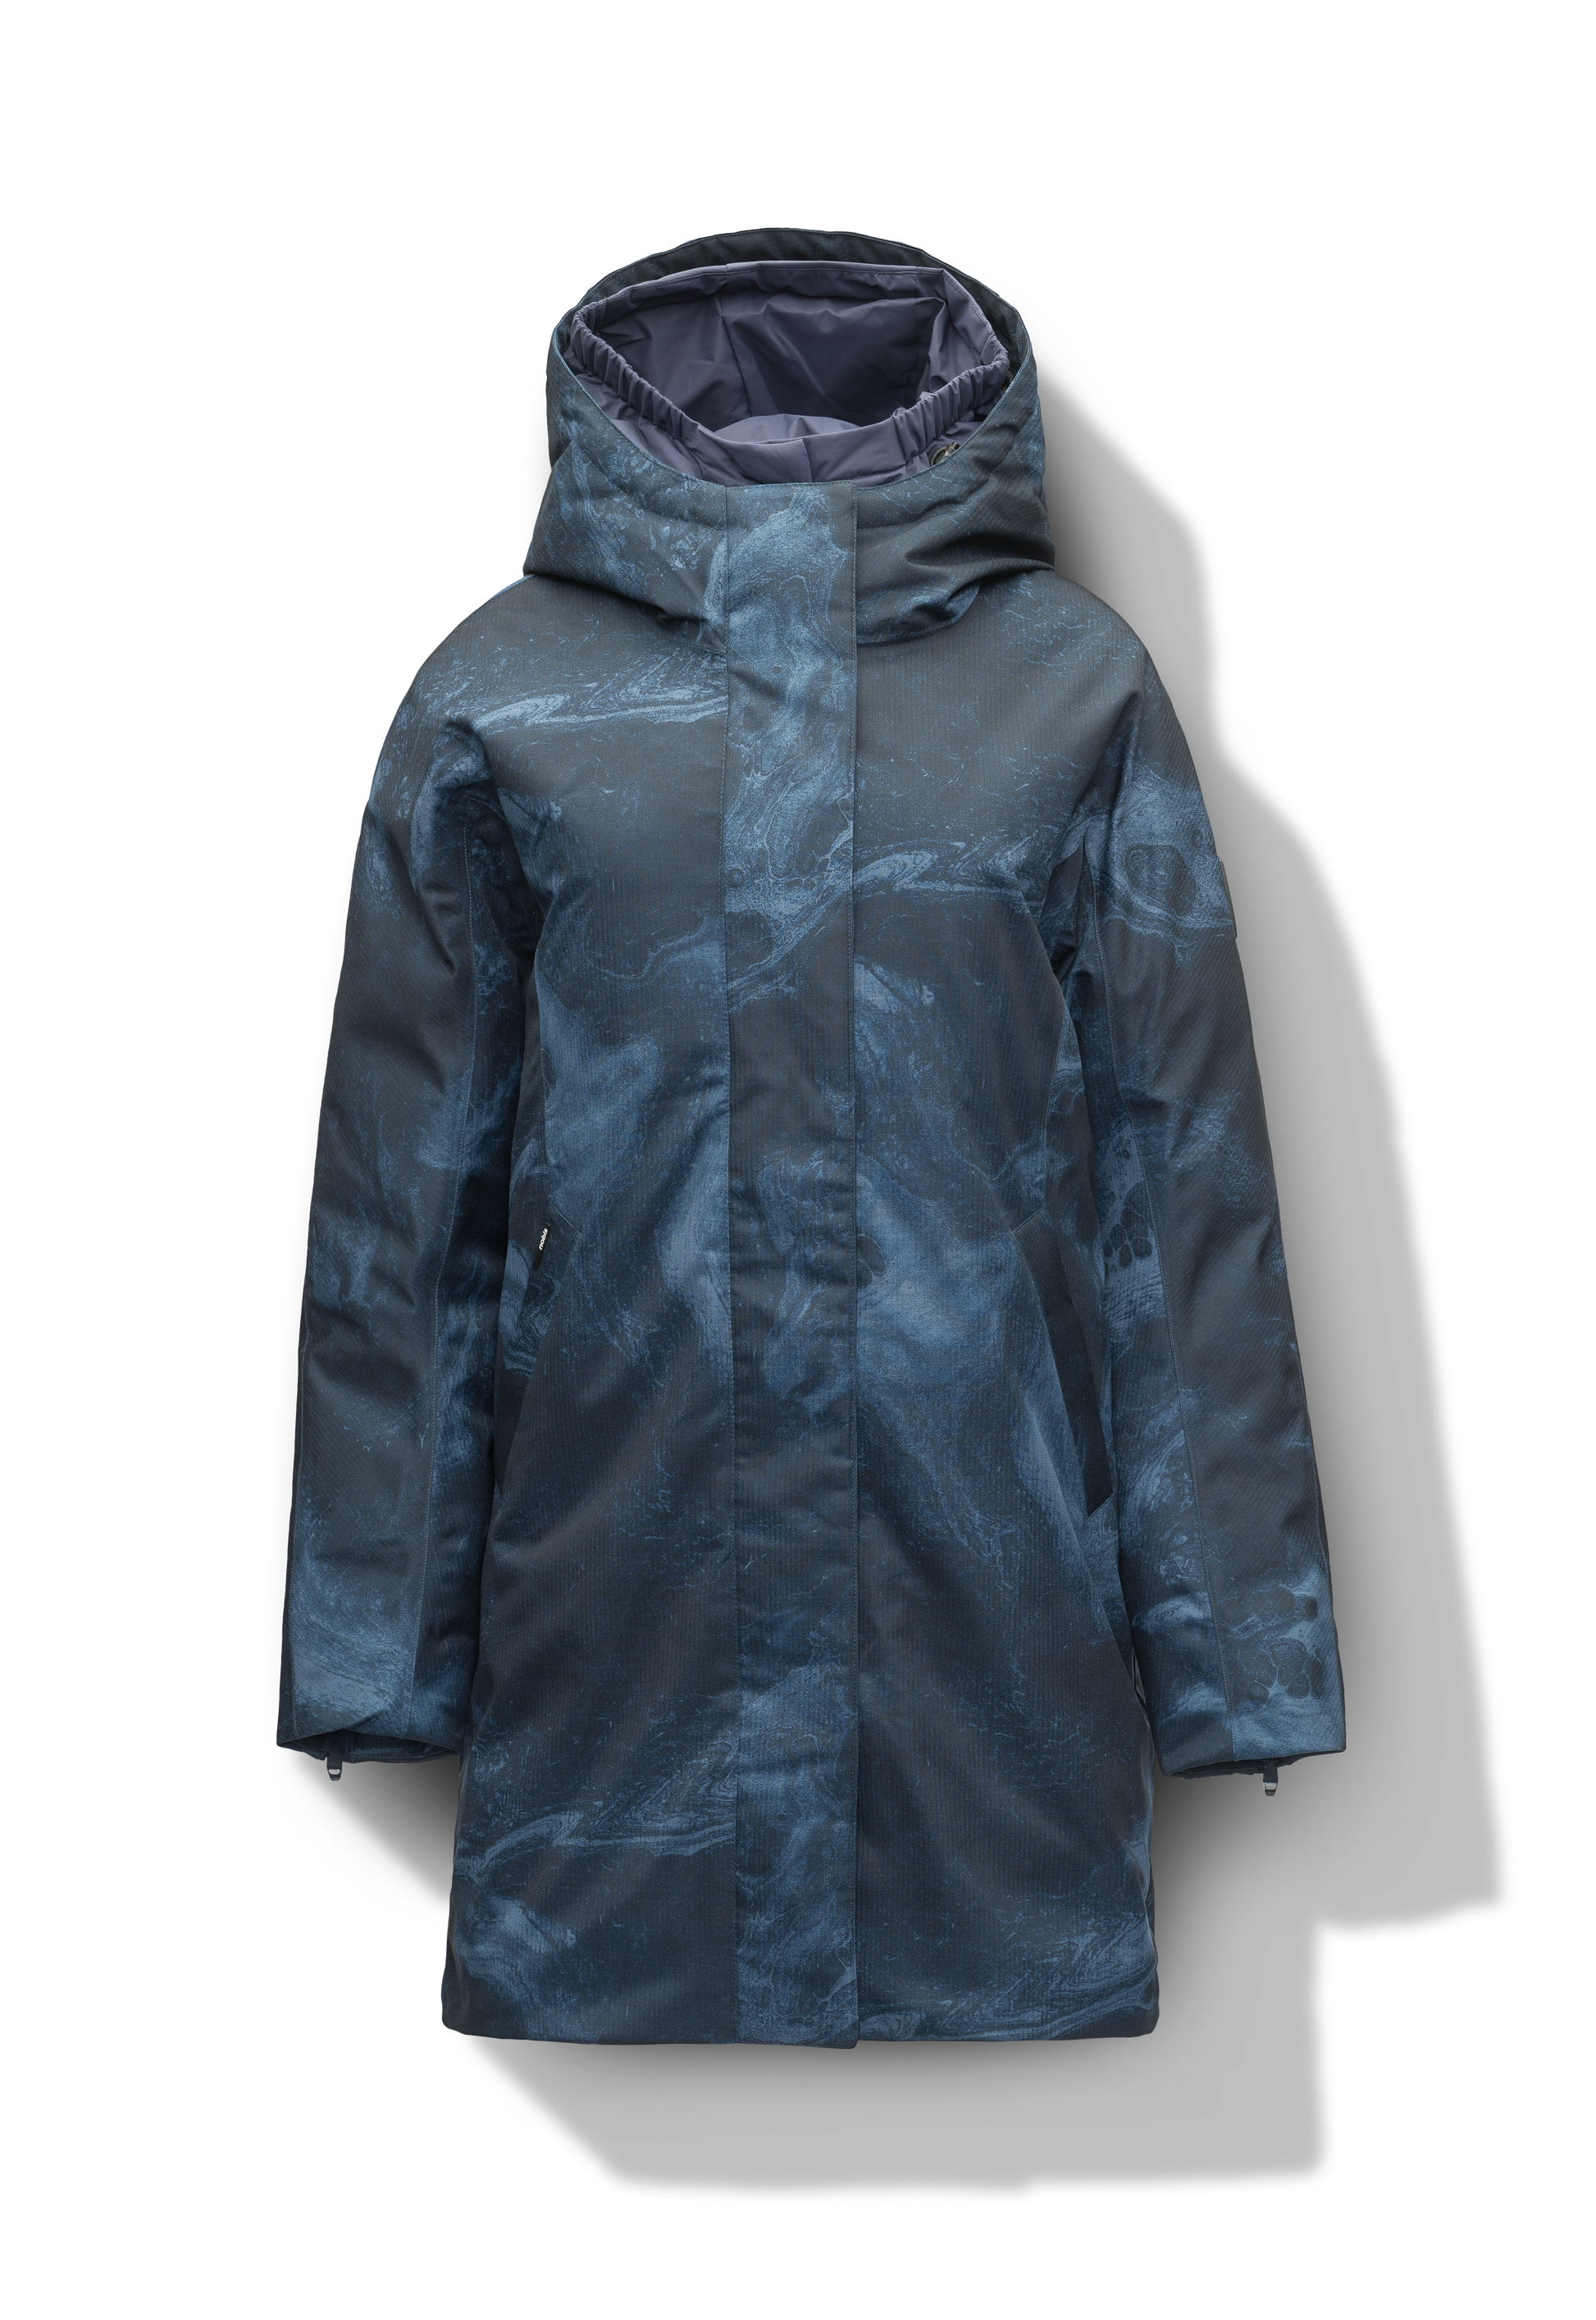 Dory Women's Tailored Back Zip Parka in knee length, premium Crosshatch fabrication, Premium Canadian White Duck Down insulation, non-removable down-filled hood, removable interior hood, centre front two-way zipper with wind flap, vertical zipper detailing along back, in Navy